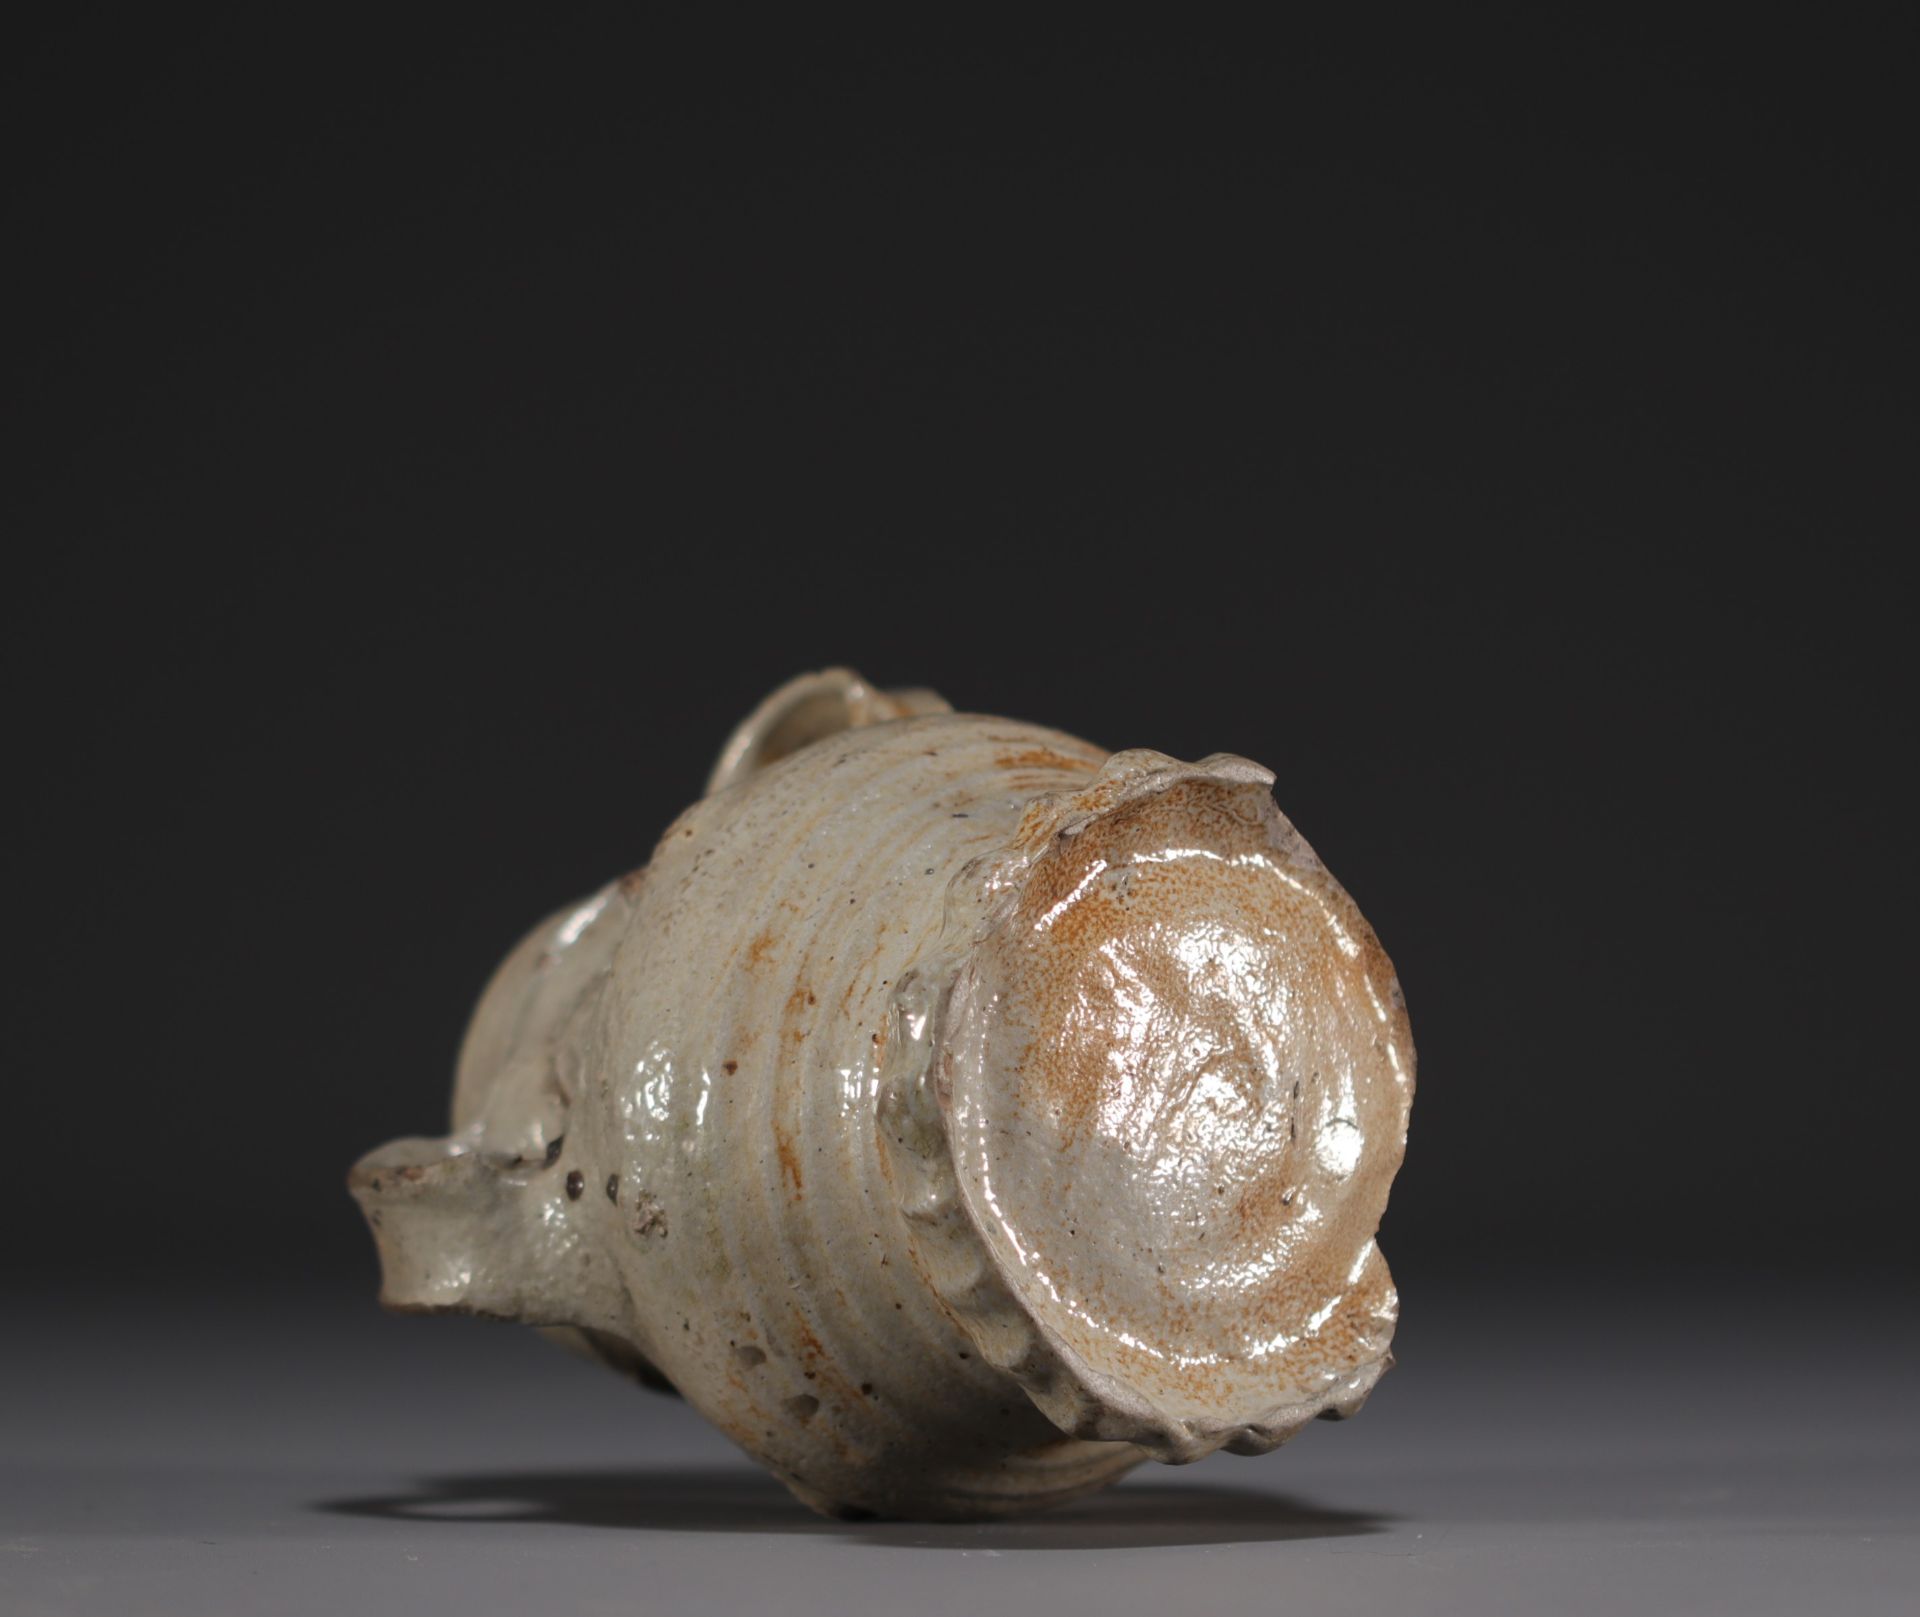 Raeren - Rare stoneware jug decorated with faces, salt glaze, early 16th century. - Image 5 of 5